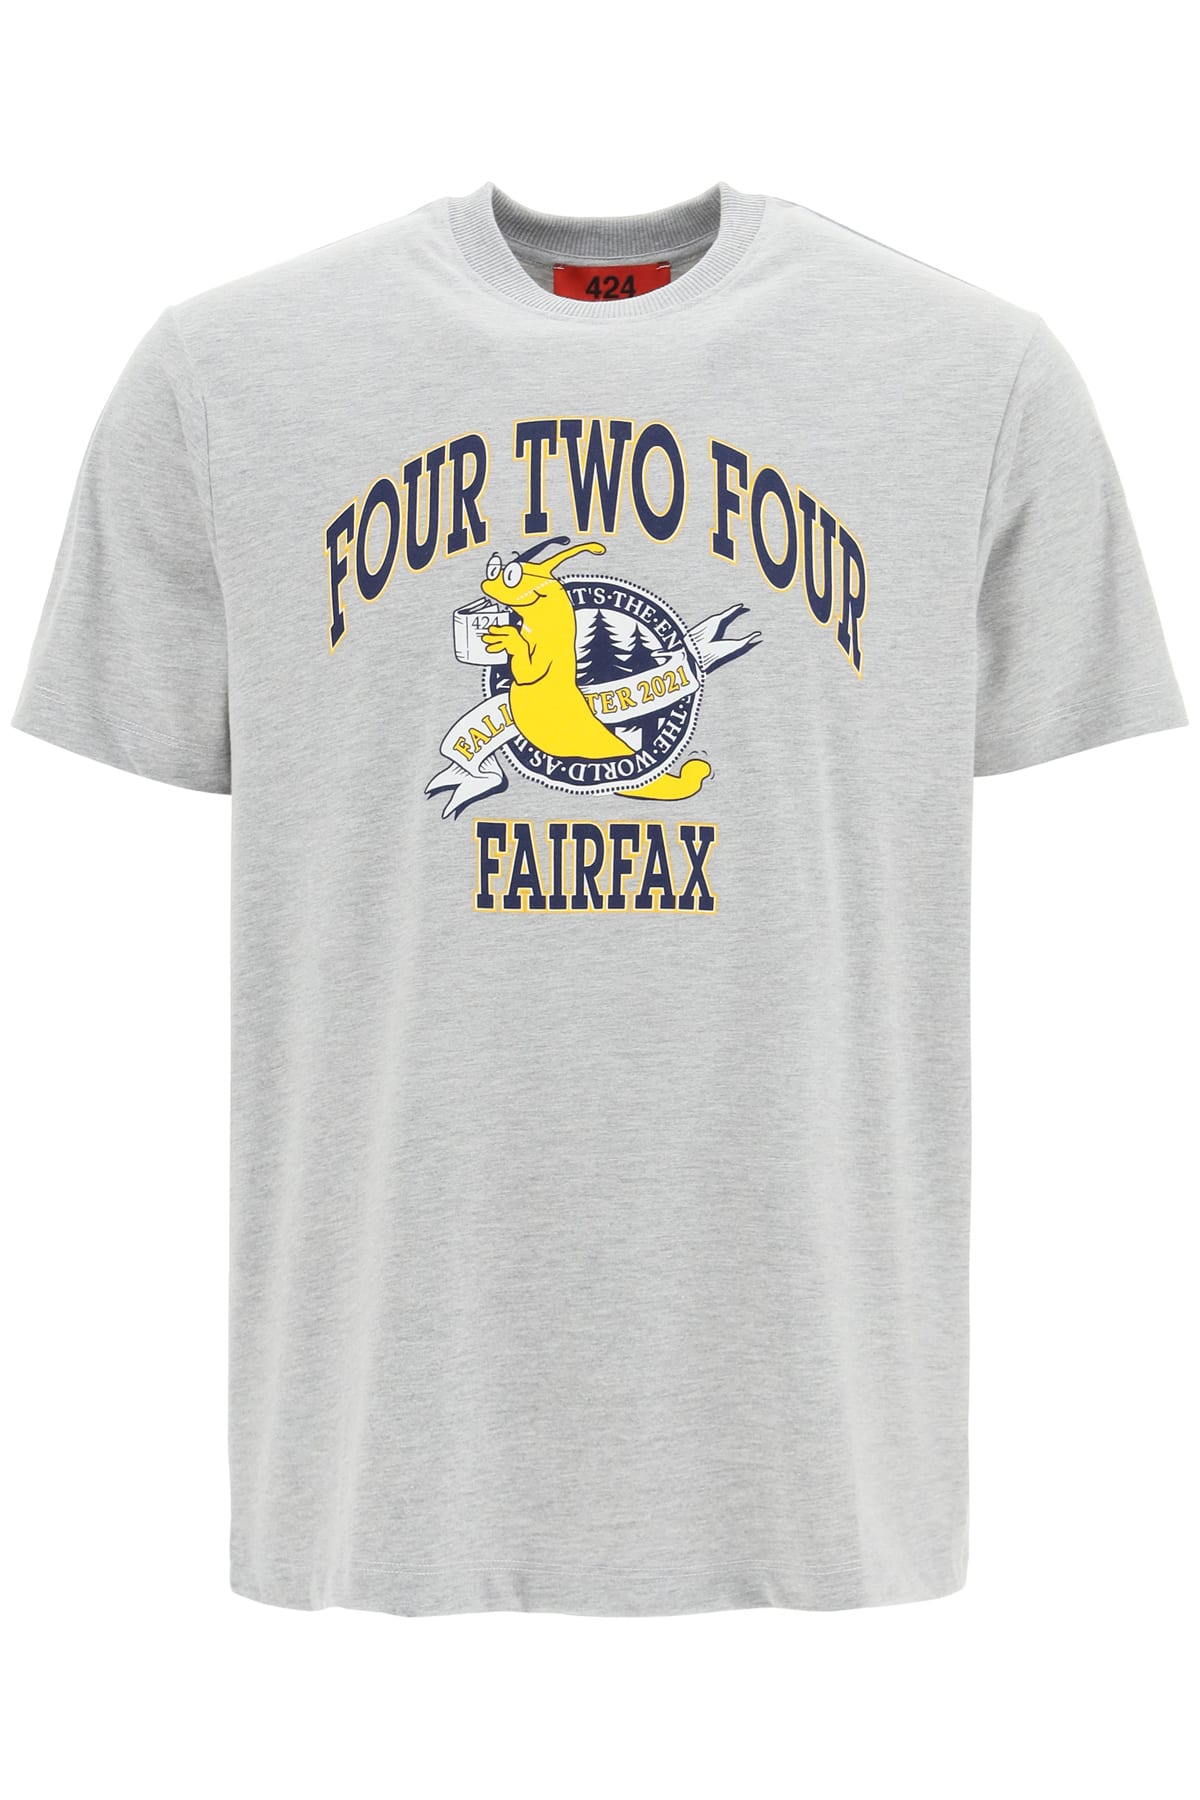 FourTwoFour on Fairfax 424 T-shirt With Graphic Print